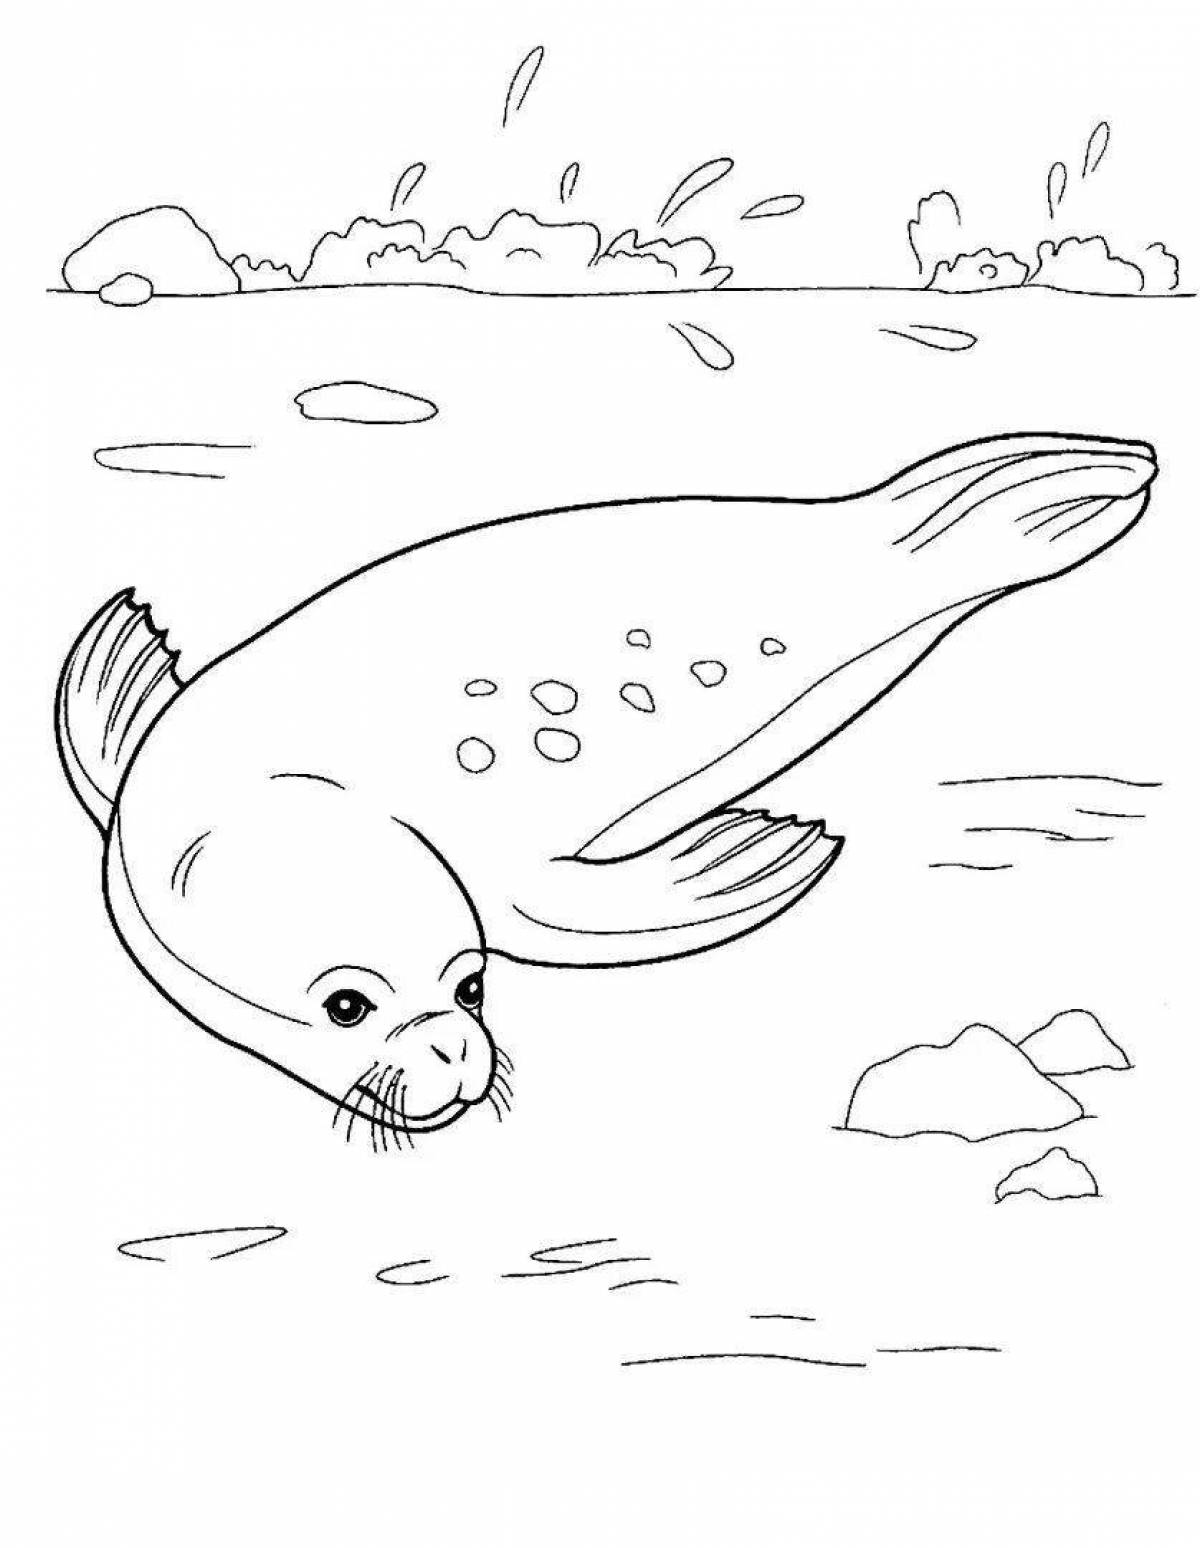 Outstanding Baikal seal coloring book for kids